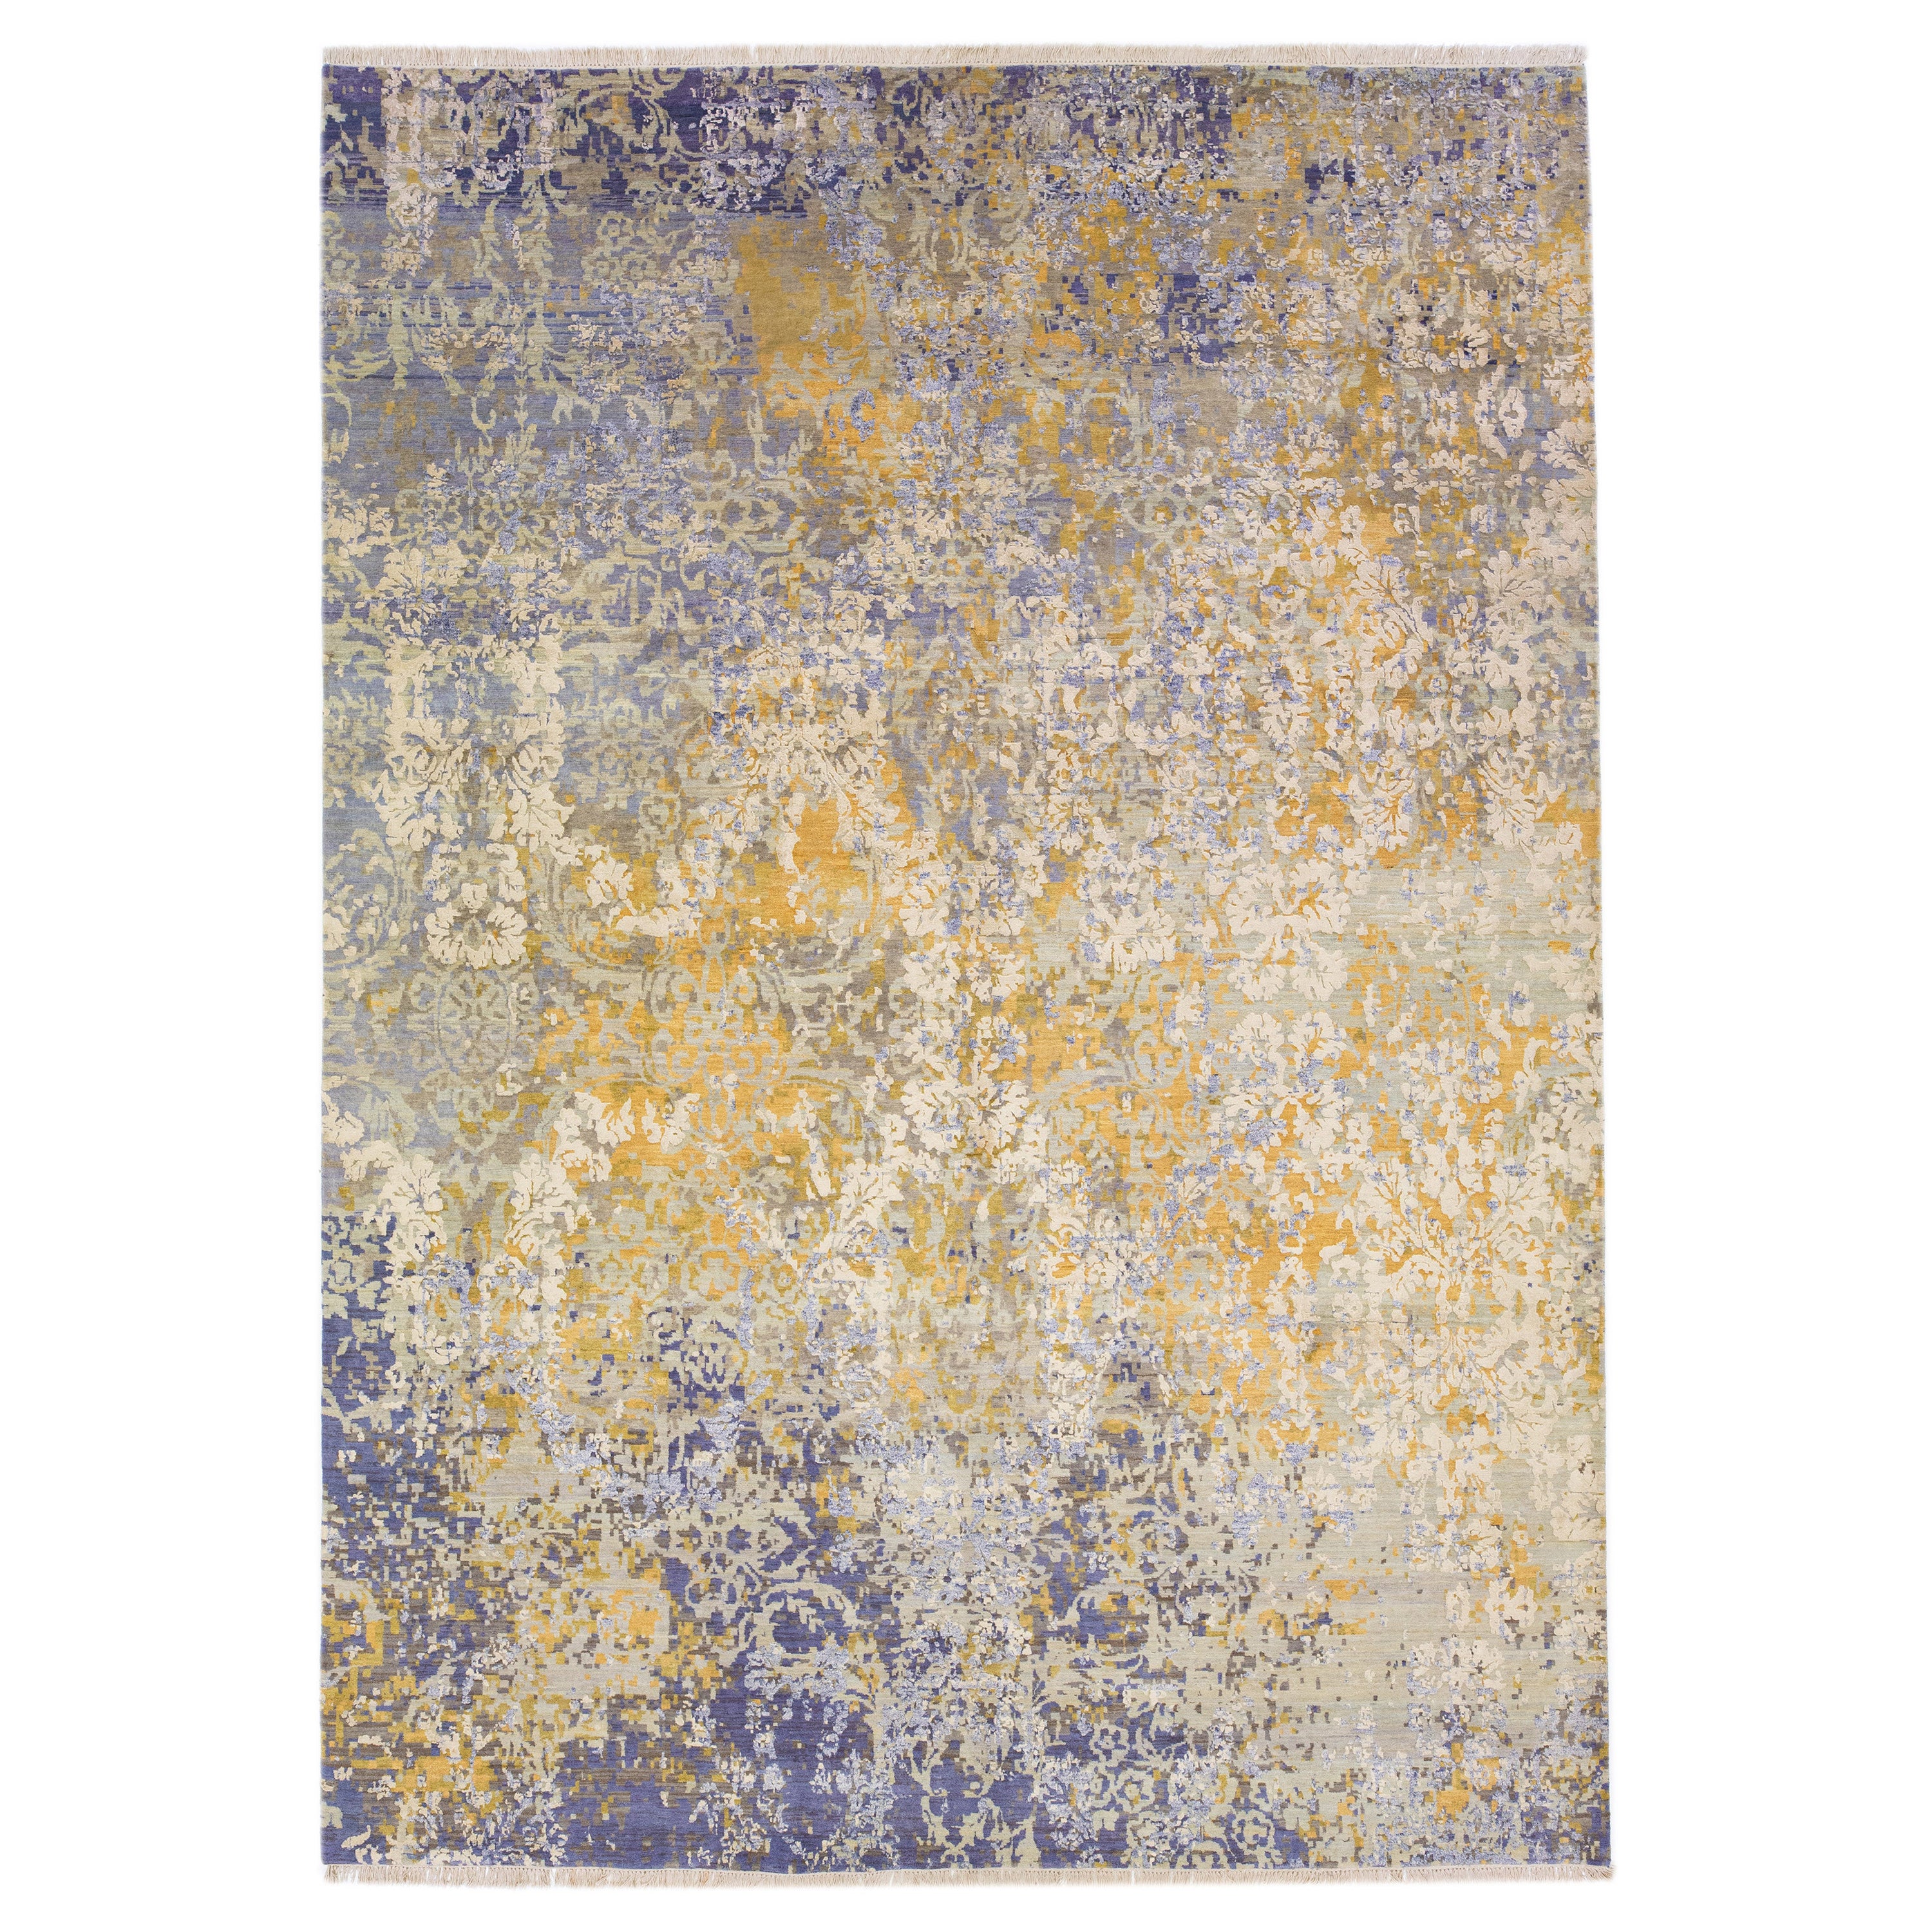 Contemporary Tibetan Wool & Silk Rug with Multicolor Abstract Pattern